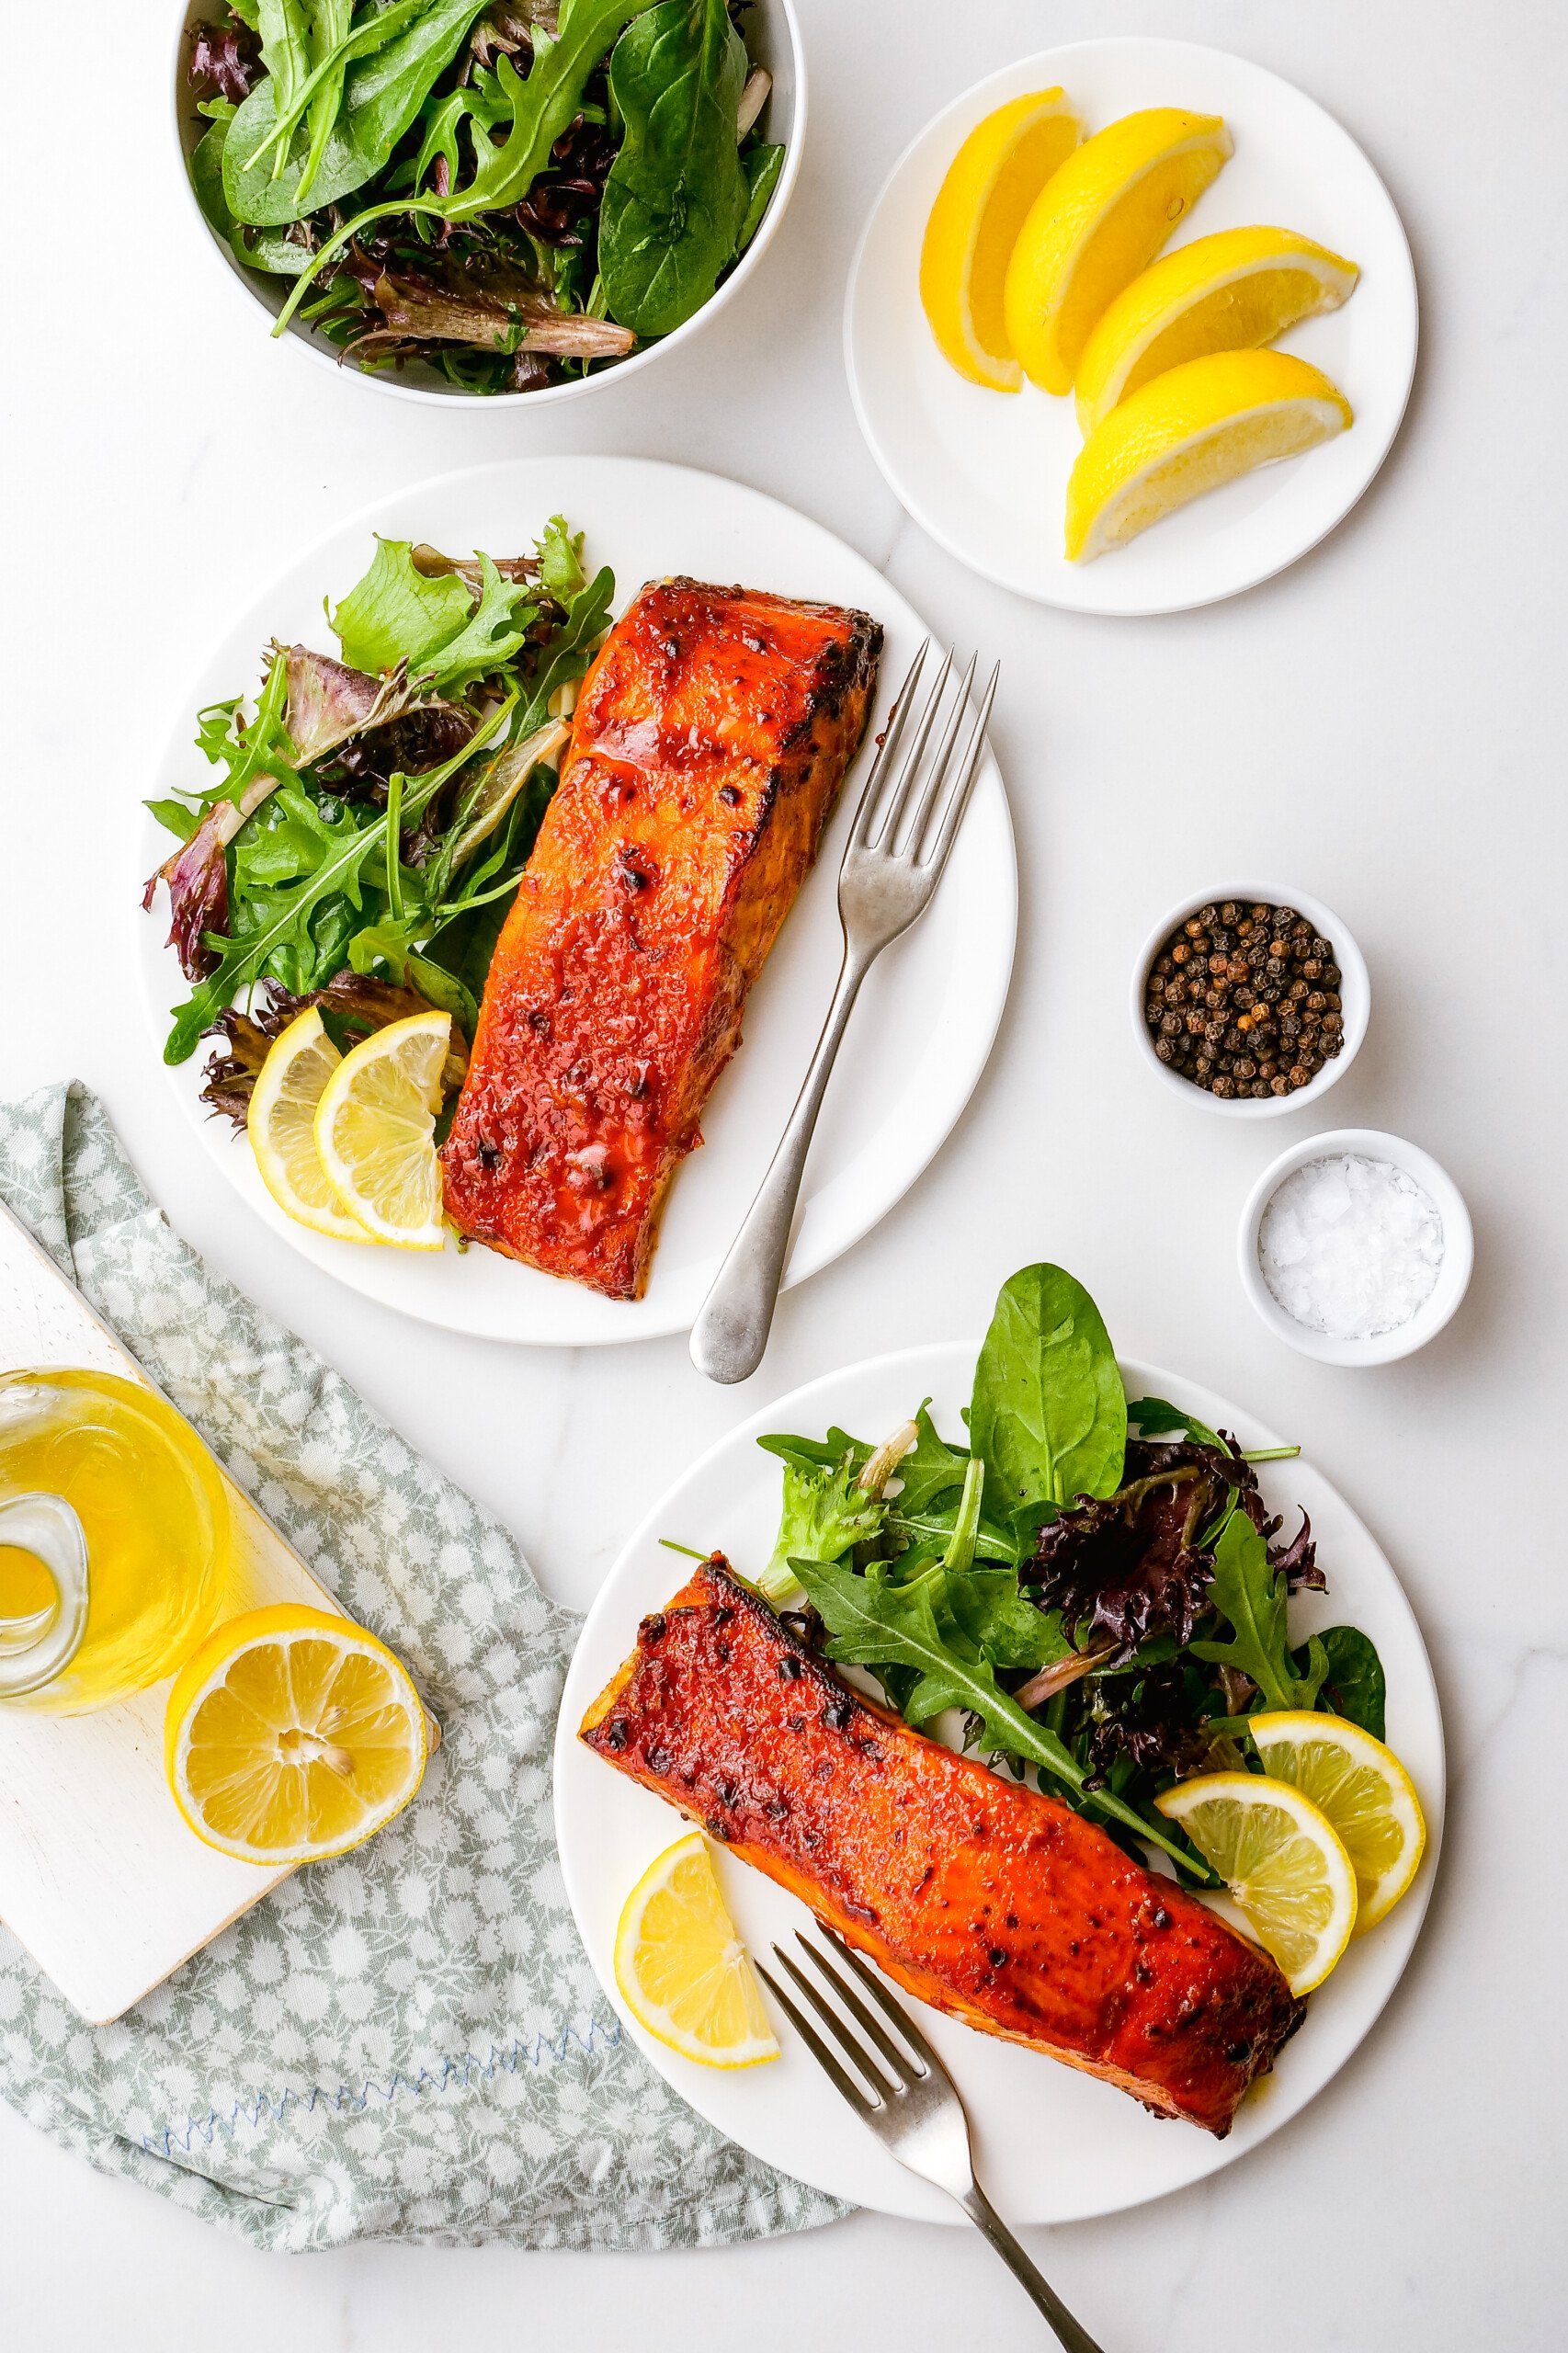 Overhead shot of a table with a small bowl of spring mix, a small dish of lemon wedges, and two dinner plates with servings of salmon, salad, and lemon garnish.